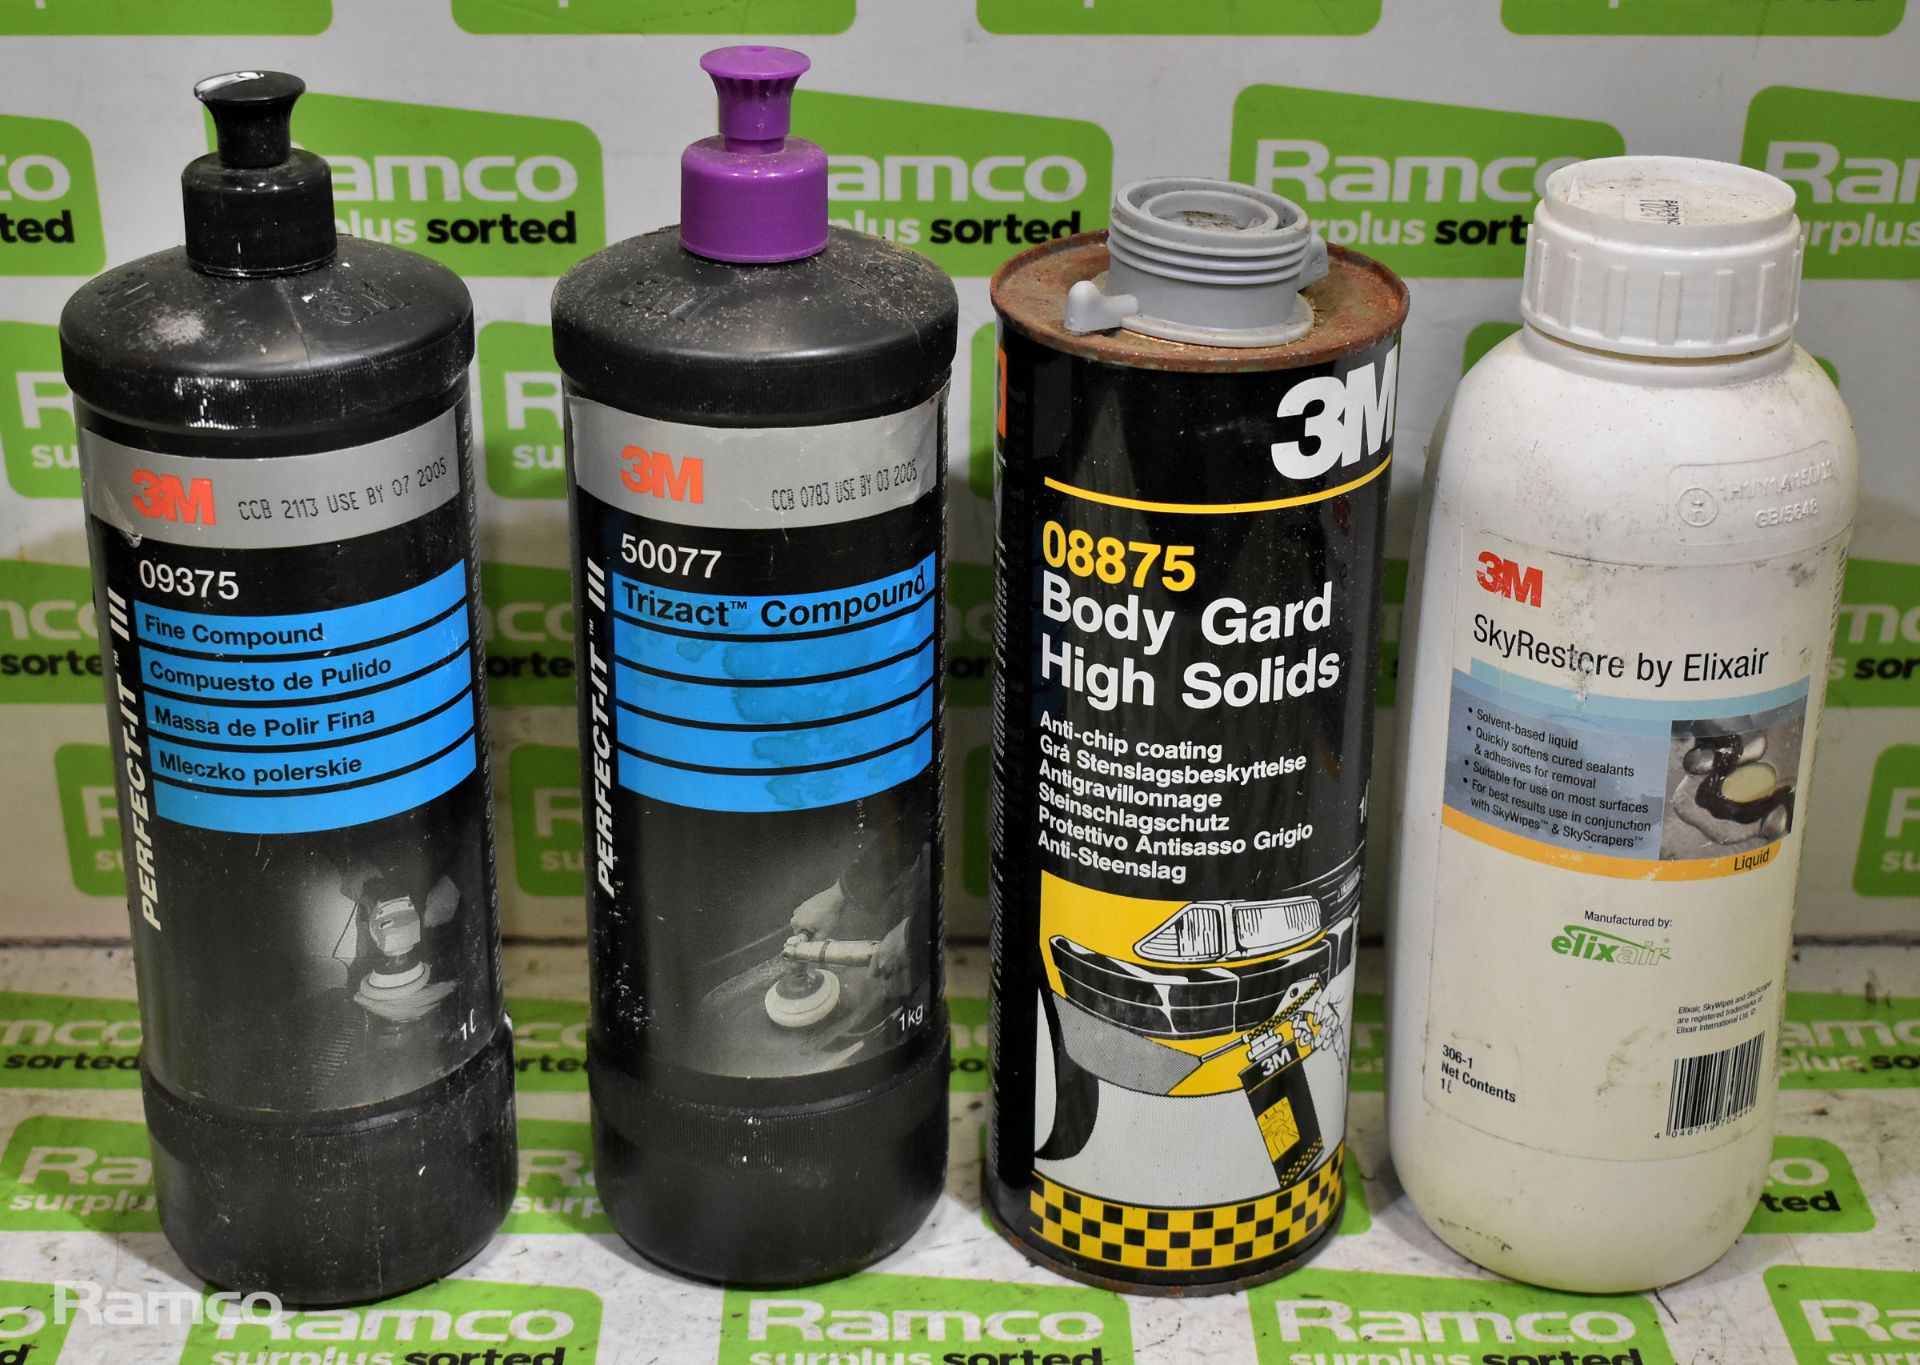 Garage consumables - Oils, lubricants, degreaser wipes - CANNOT BE SENT VIA PARCEL - Image 5 of 15